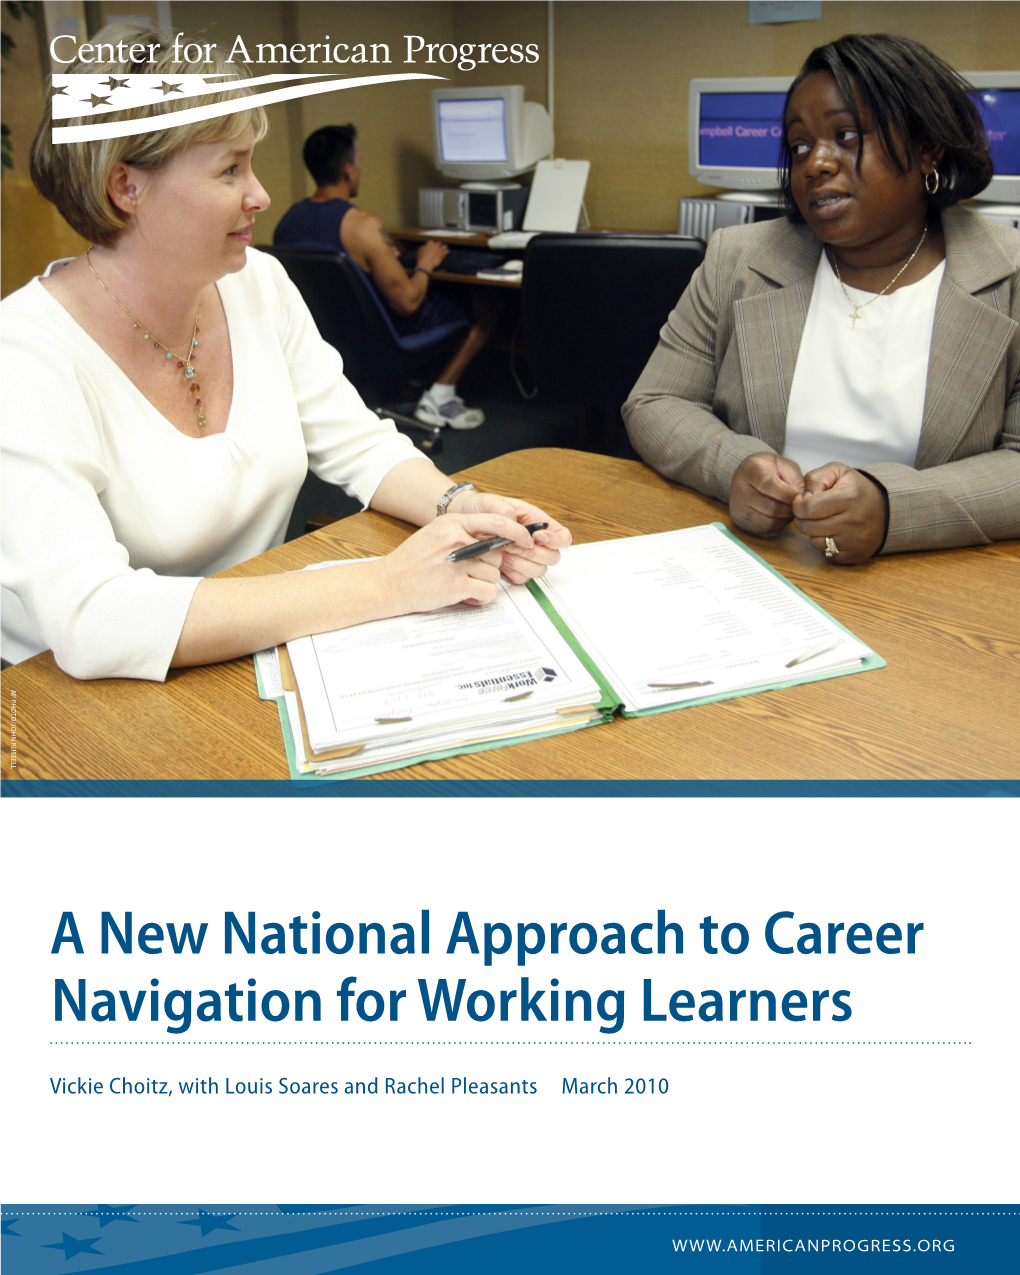 A New National Approach to Career Navigation for Working Learners